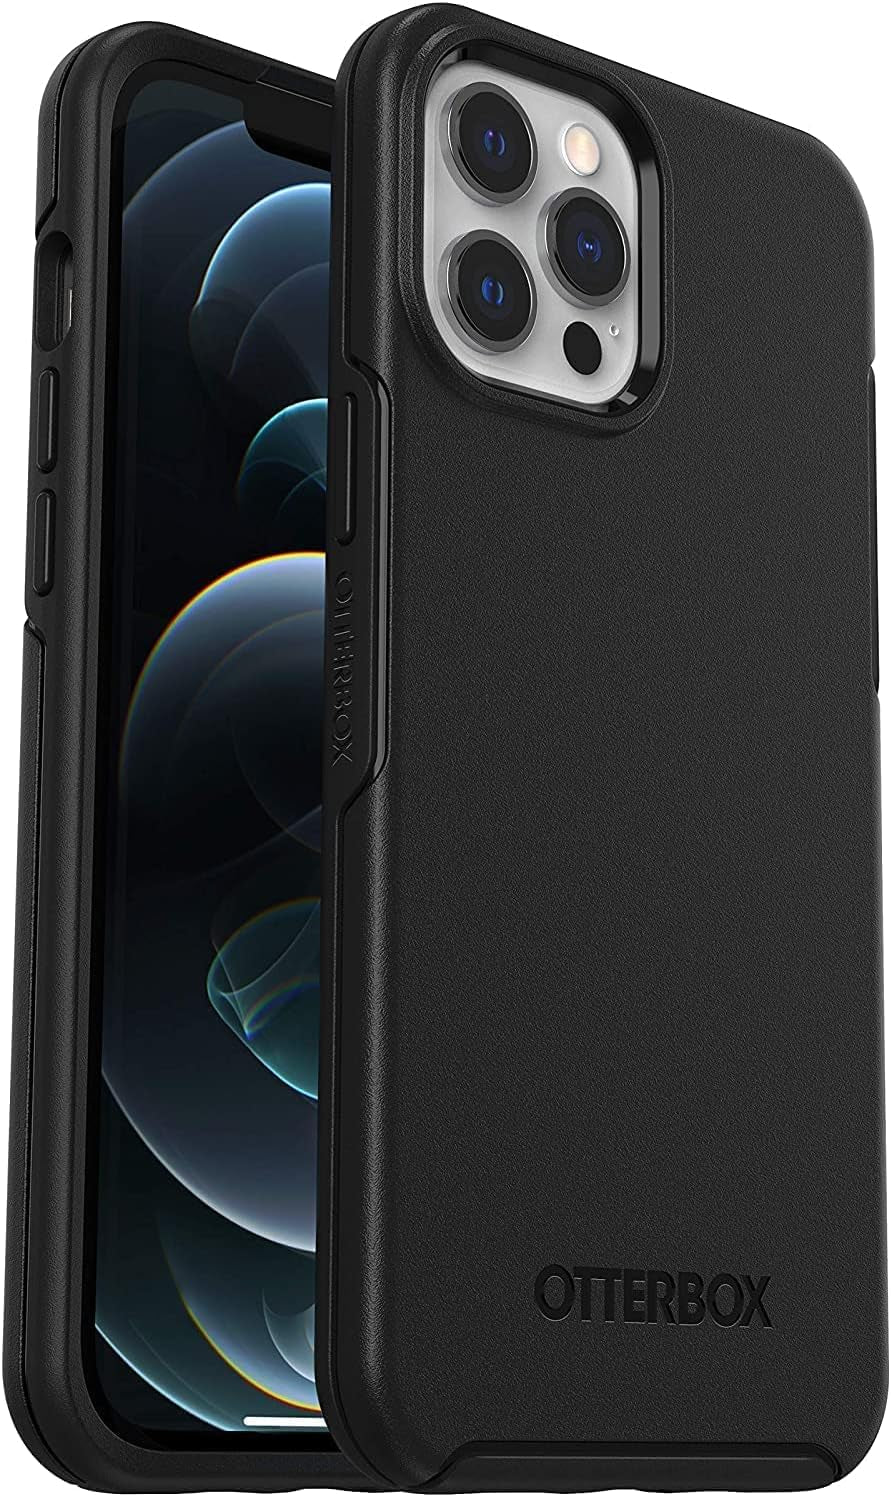 SYMMETRY SERIES Case for Iphone 12 Pro Max - BLACK